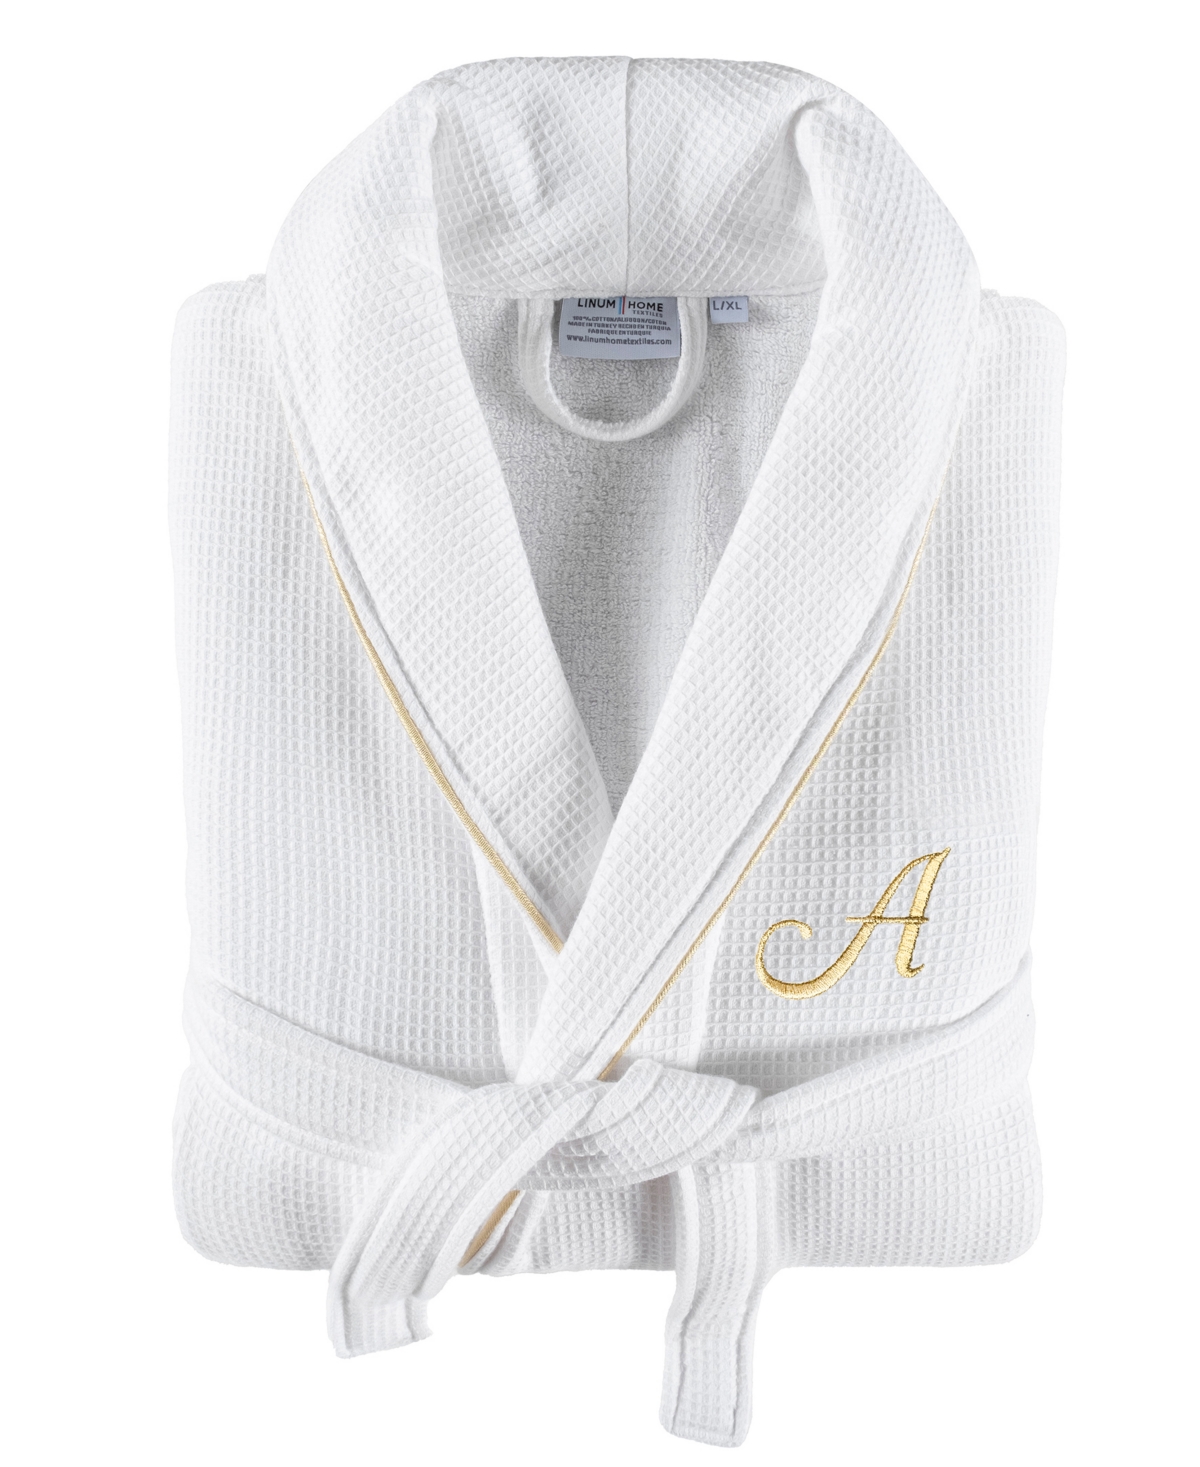 Shop Linum Home Textiles 100% Turkish Cotton Unisex Personalized Waffle Weave Terry Bathrobe With Satin Piped Trim In White A